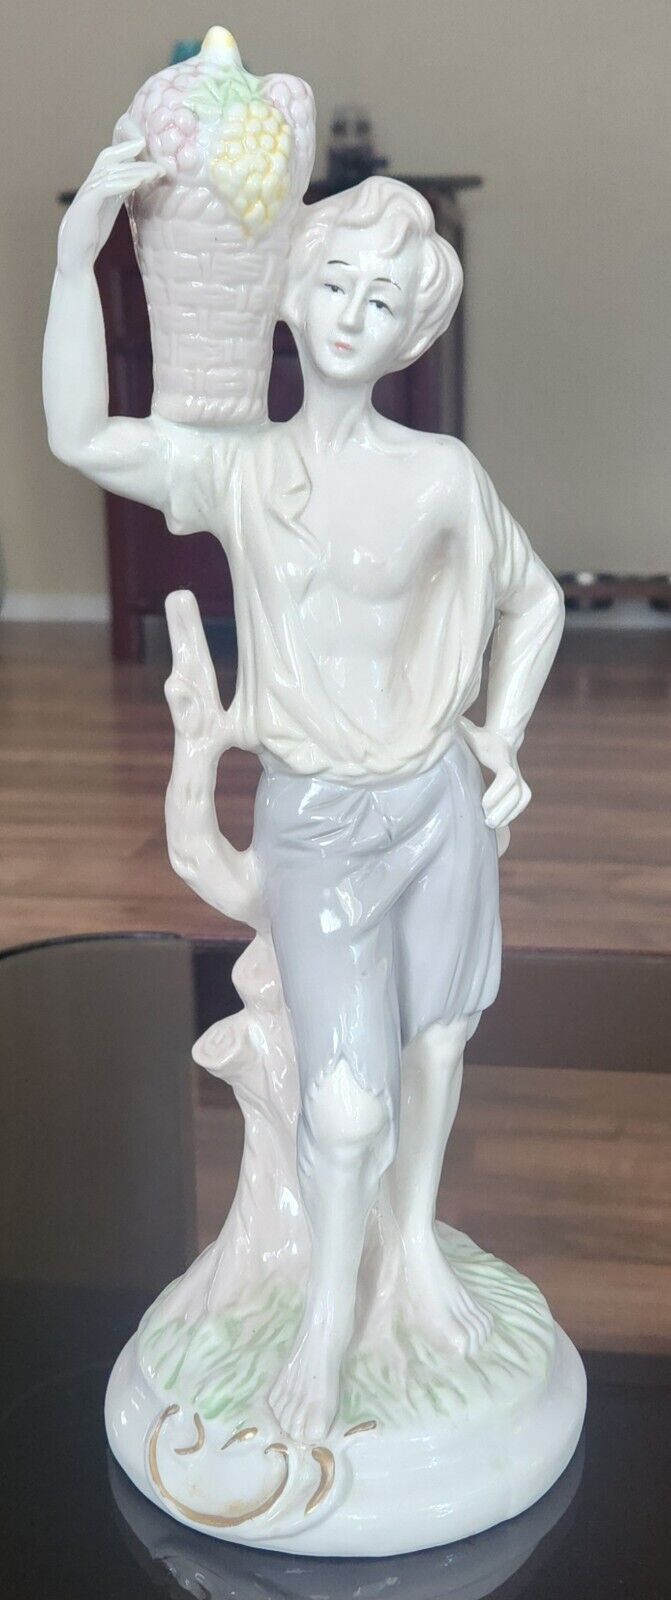 Vintage Porcelain Hand Painted Figurine Of Young Man Carrying Basket Of Grapes 